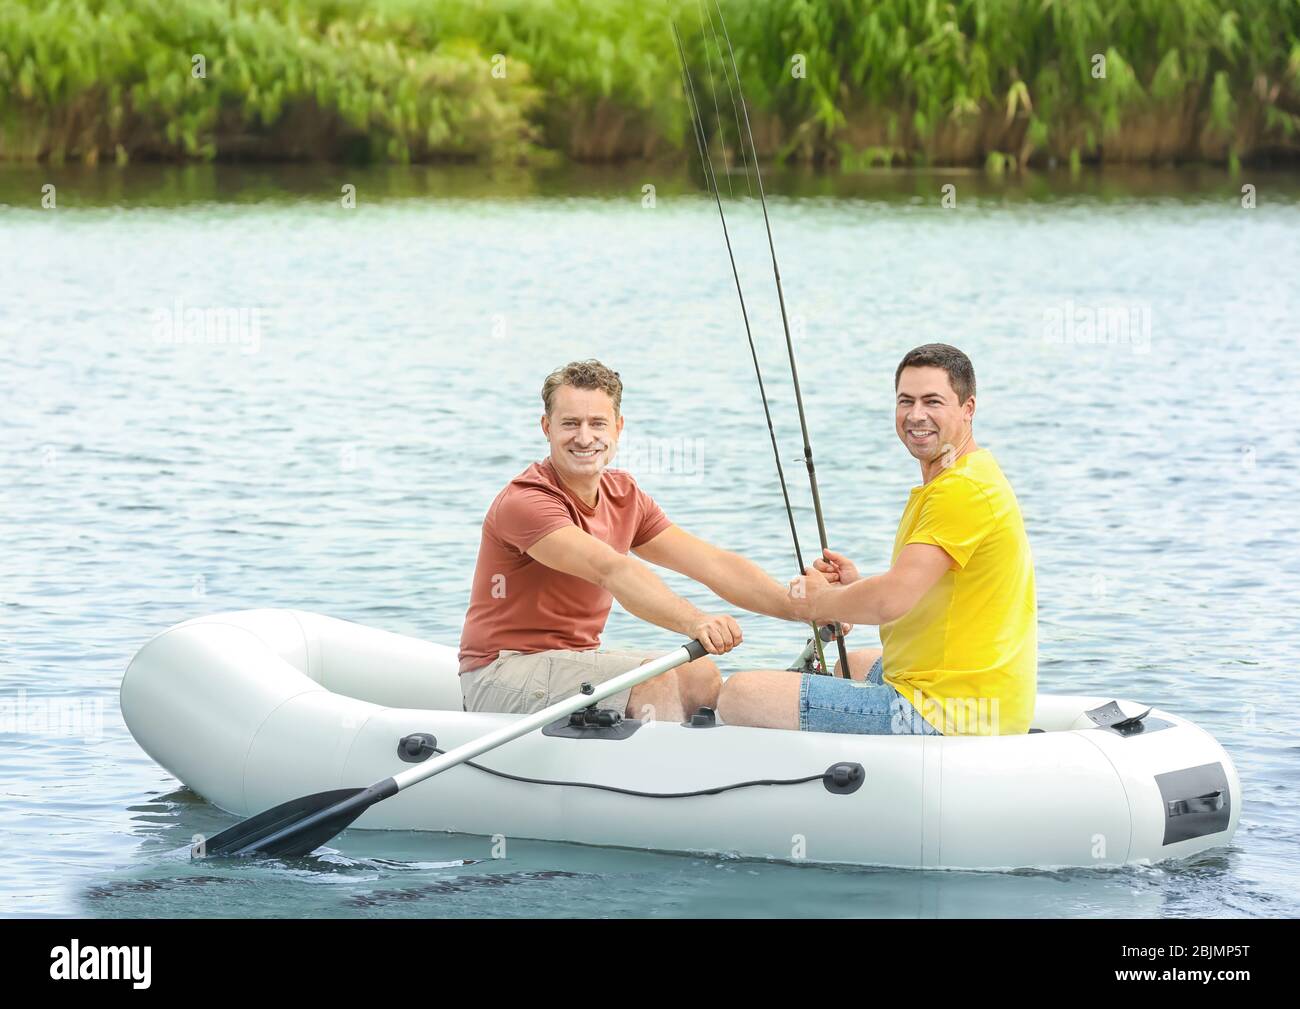 Two men fishing from inflatable boat on river Stock Photo - Alamy